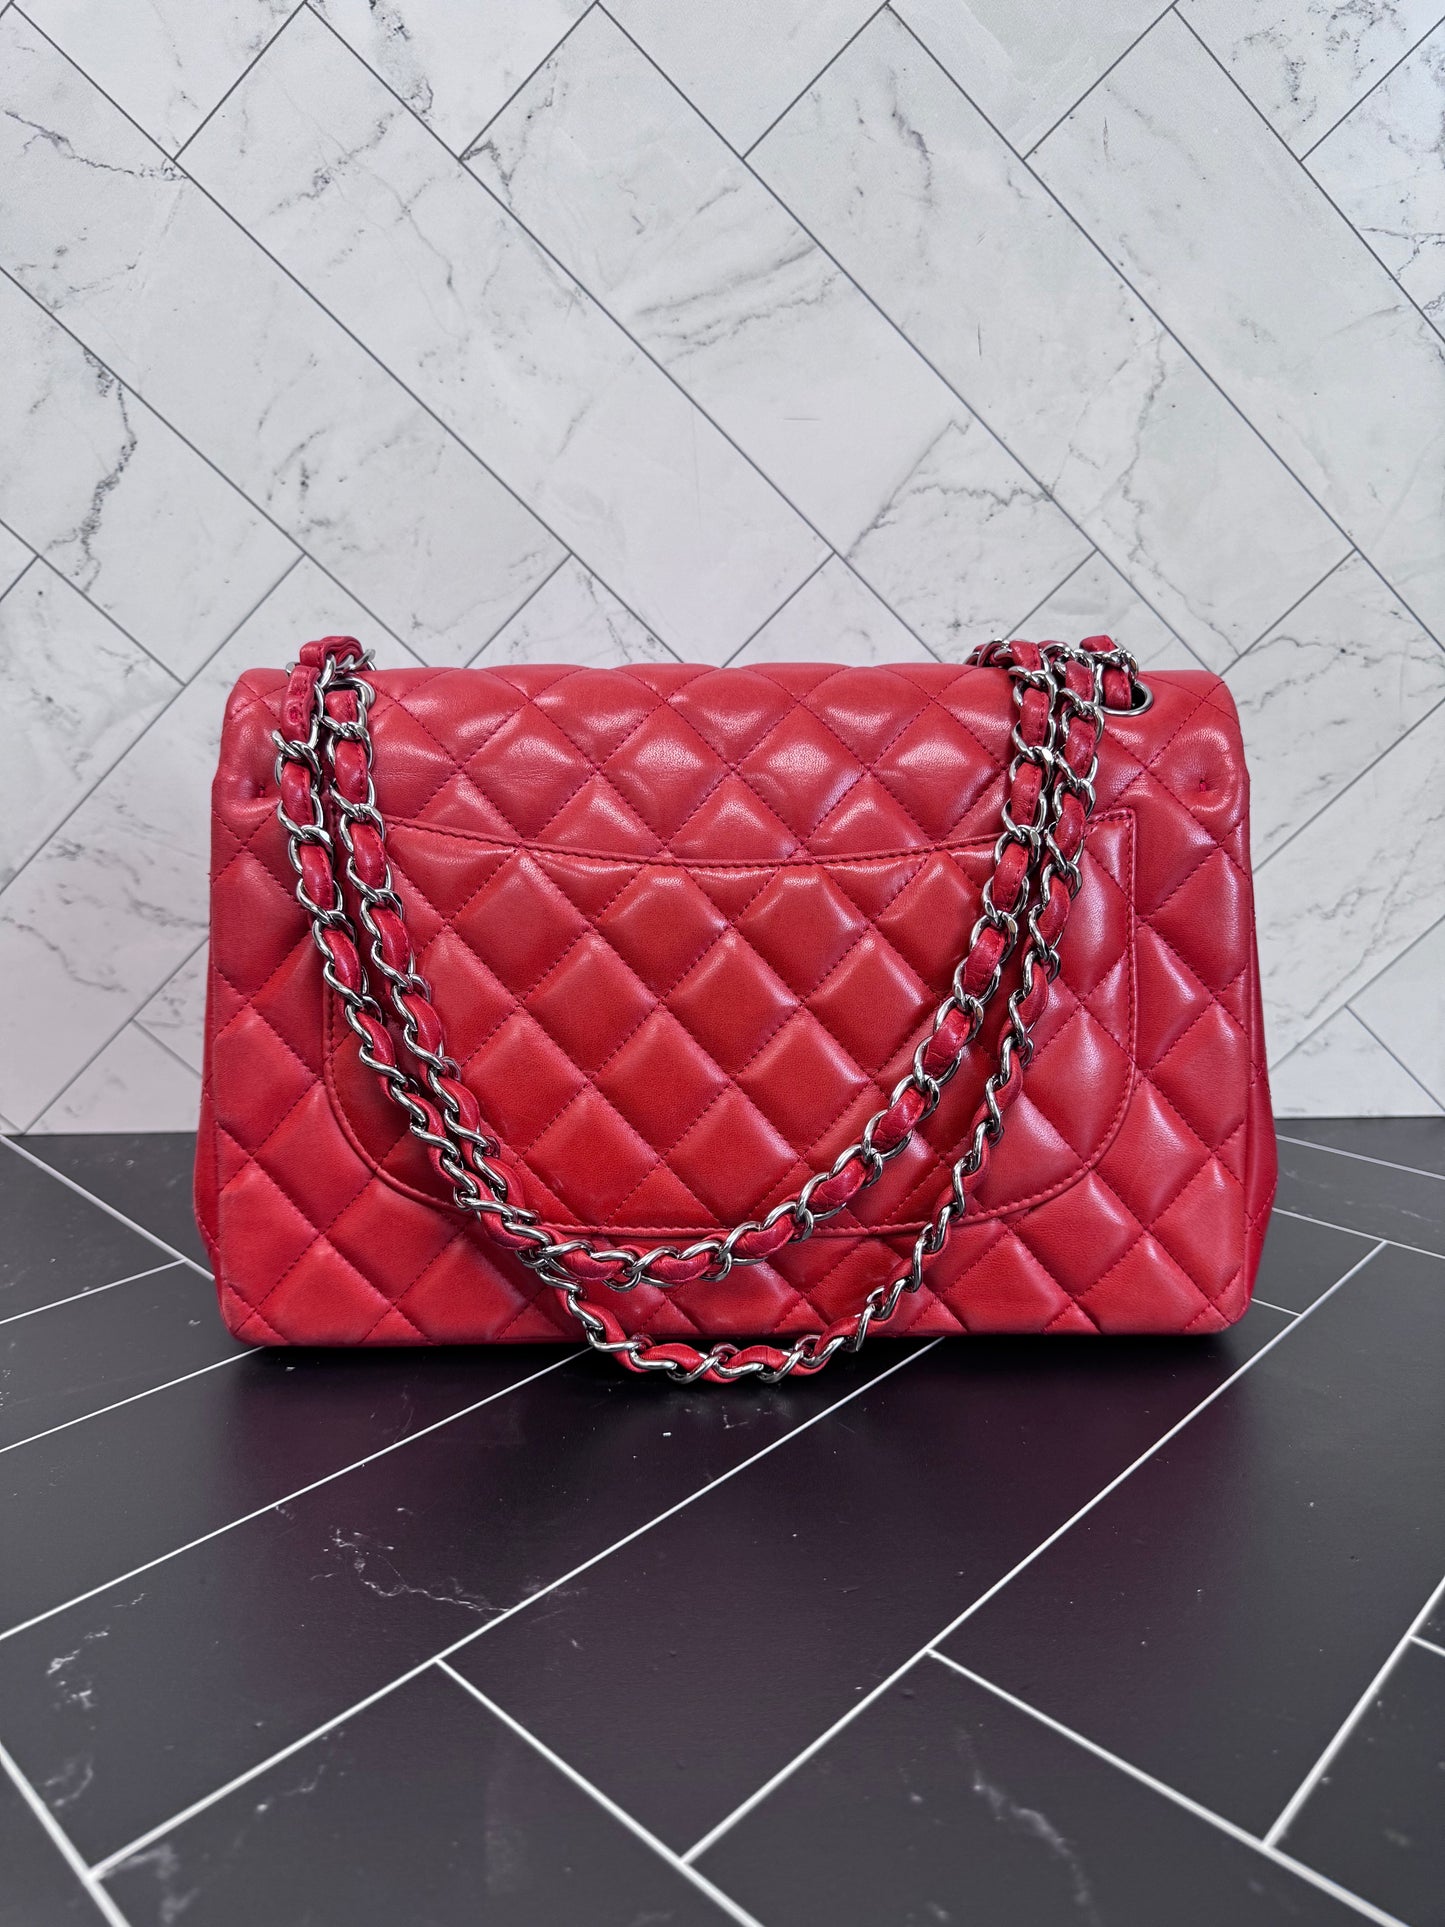 Chanel Orange/Red Lambskin Quilted Large Double Flap